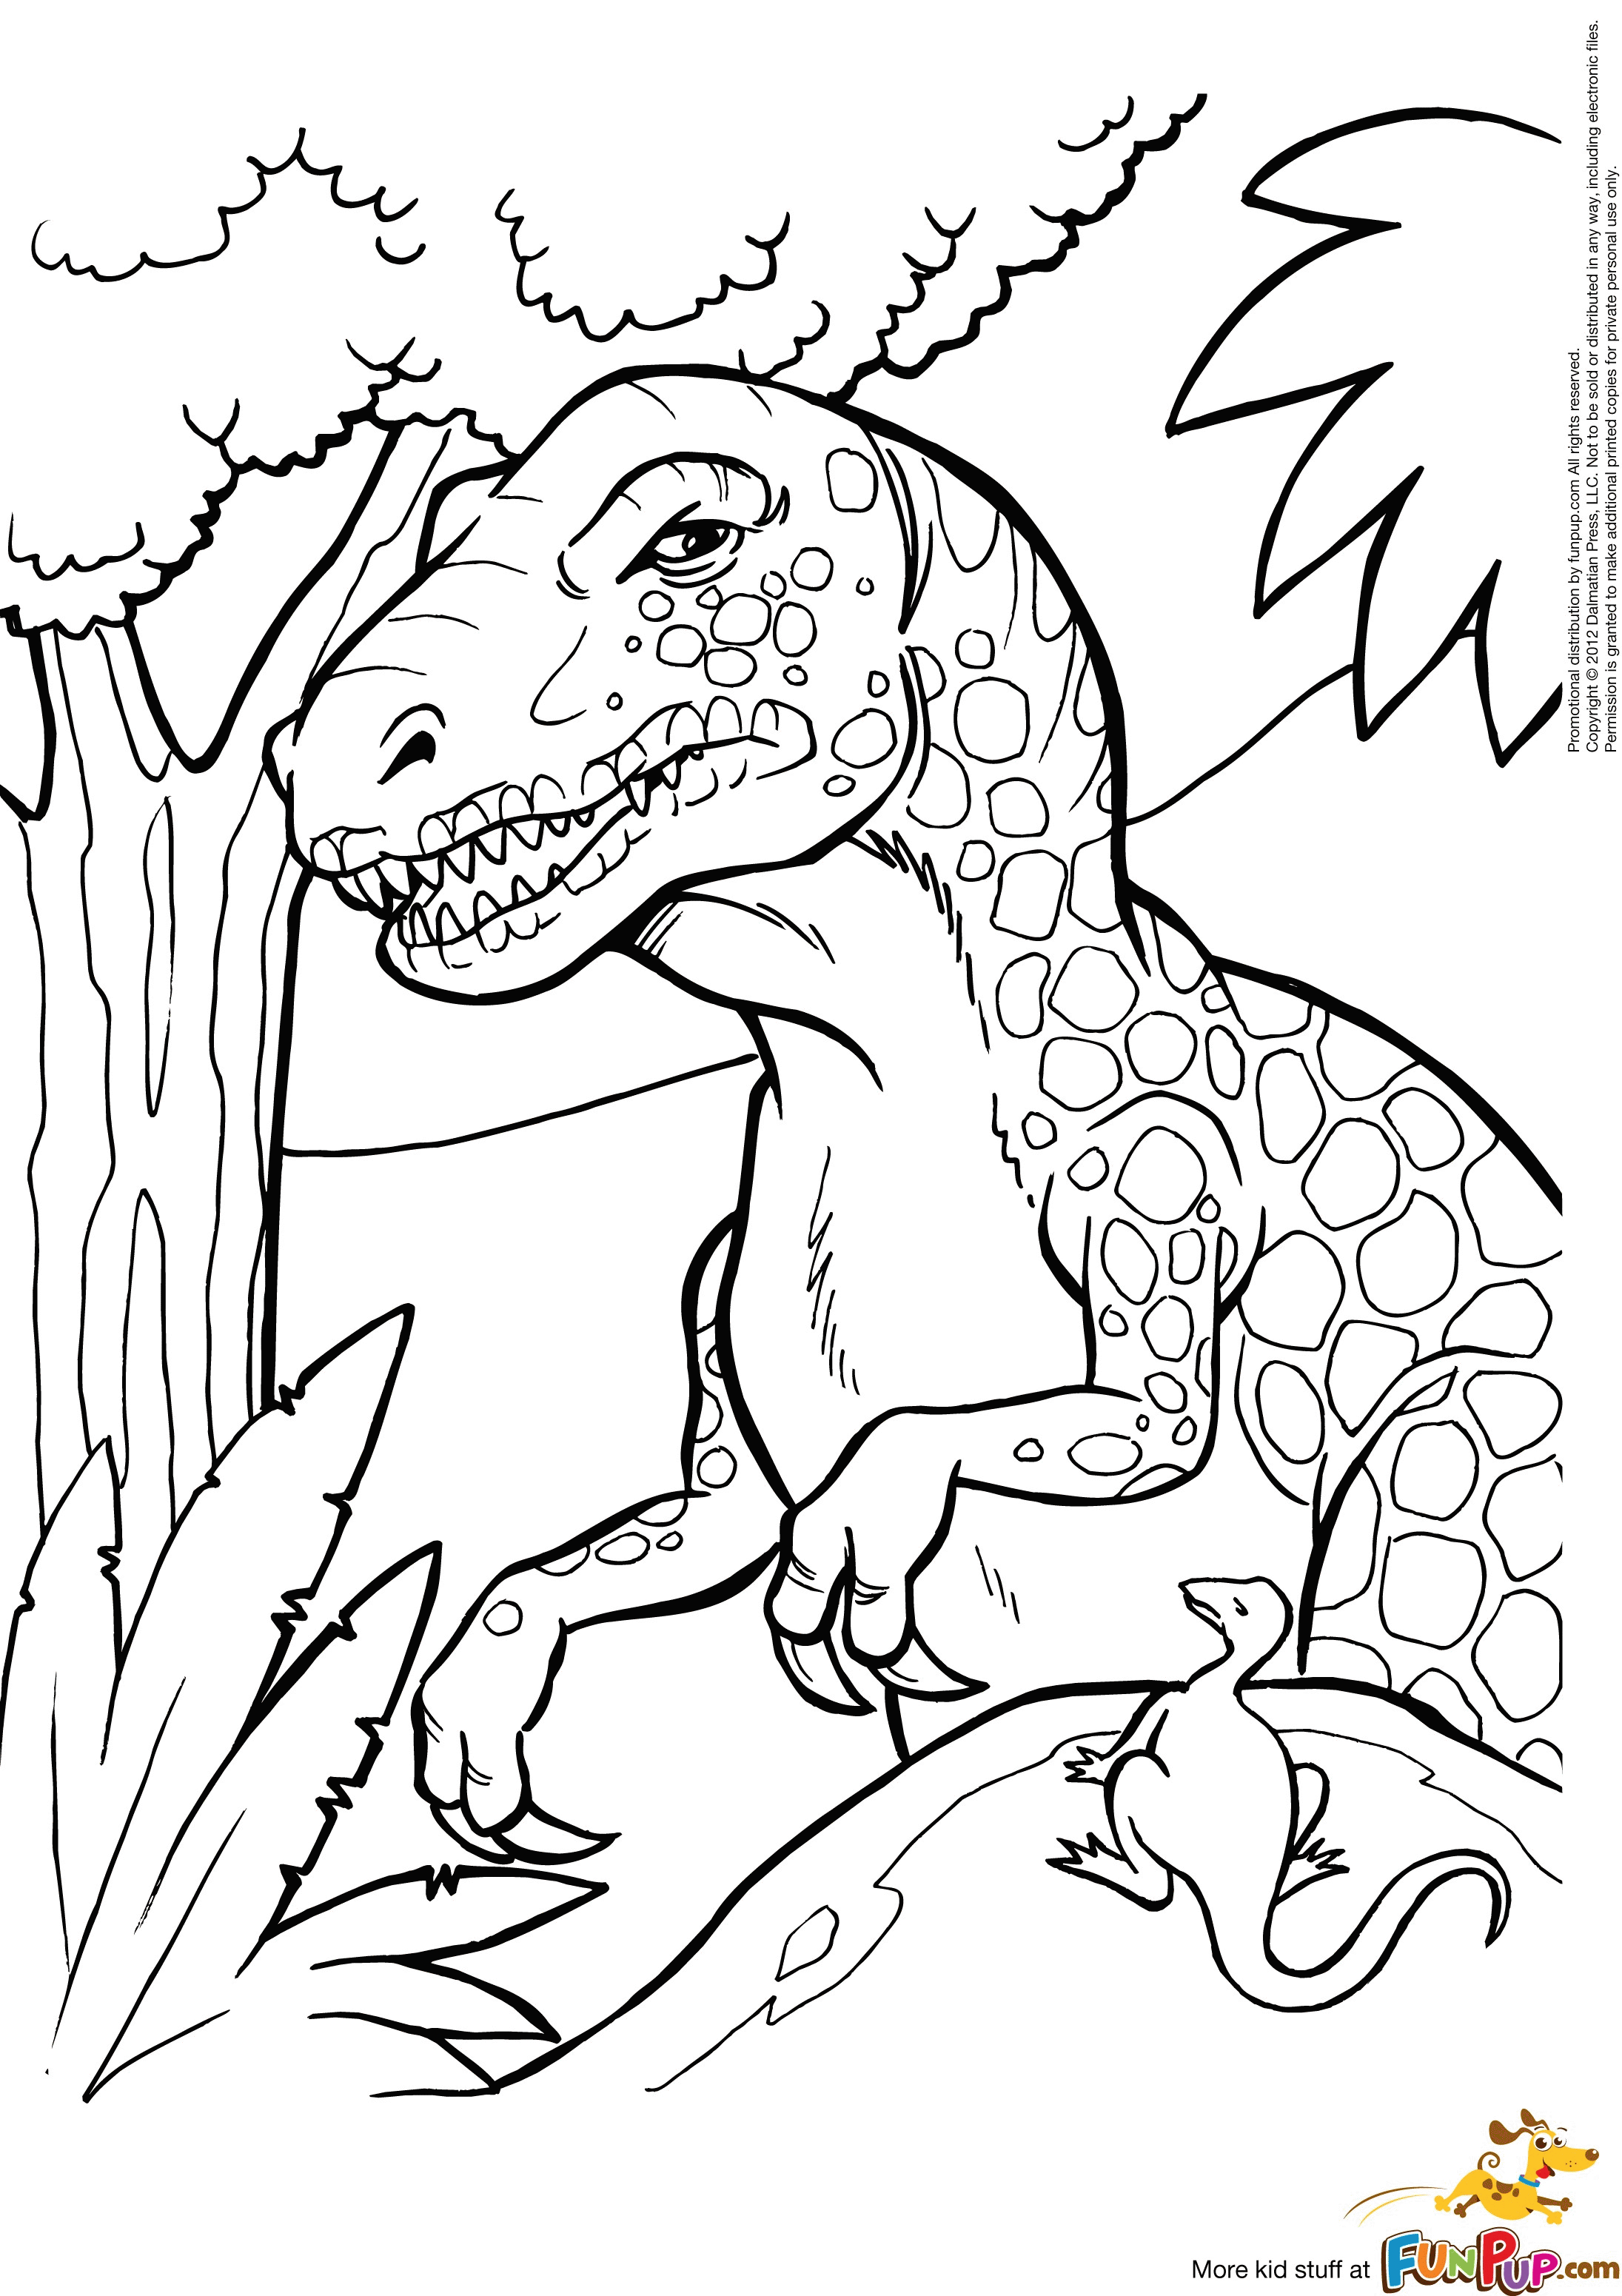 Download Cute T-rex Coloring Page - Coloring Home